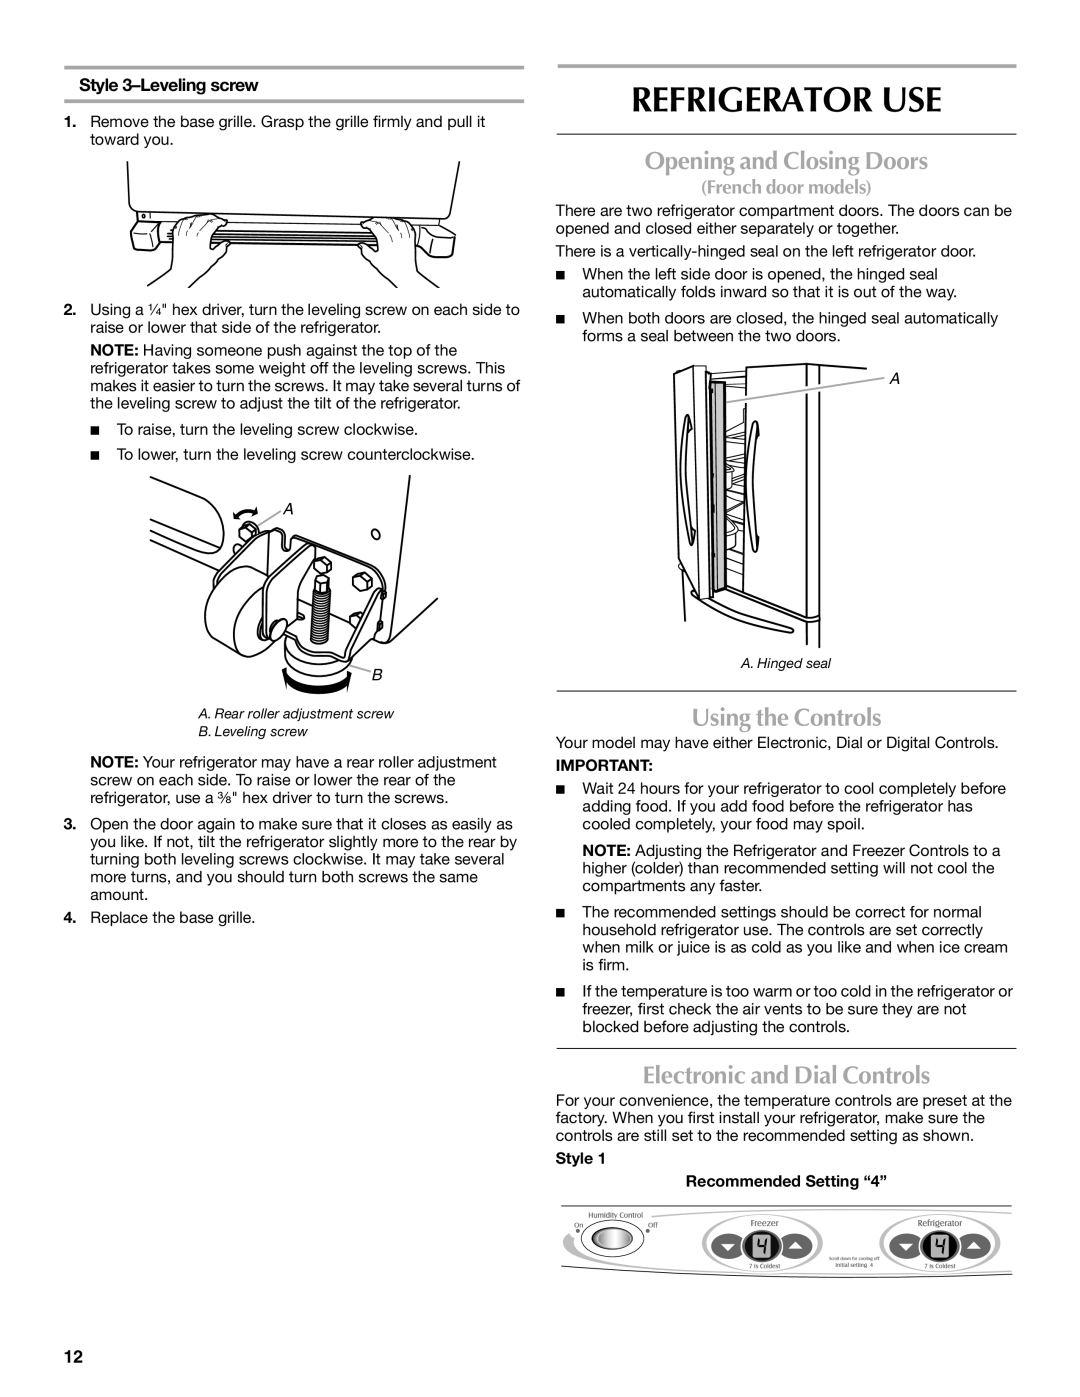 Maytag W10175446B manual Refrigerator Use, Opening and Closing Doors, Using the Controls, Electronic and Dial Controls 